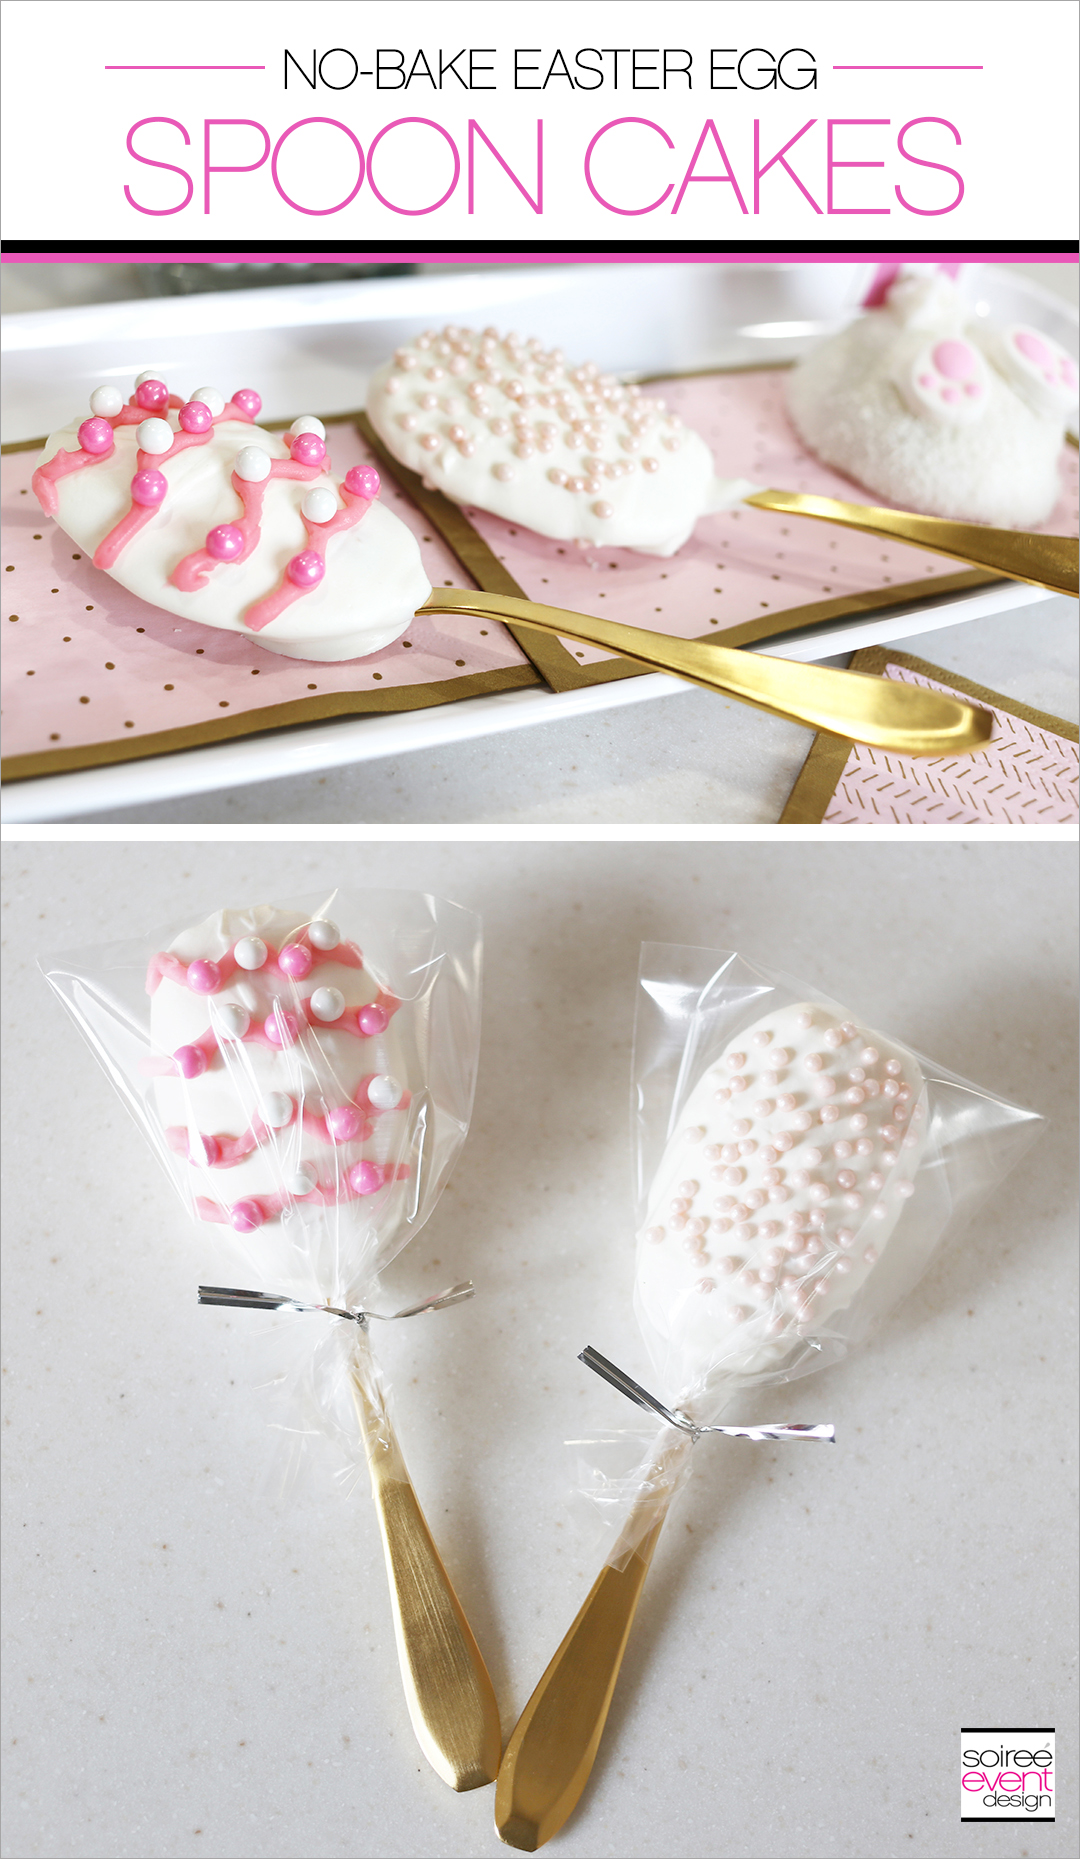 Easter No-Bake Desserts - Spoon Cakes